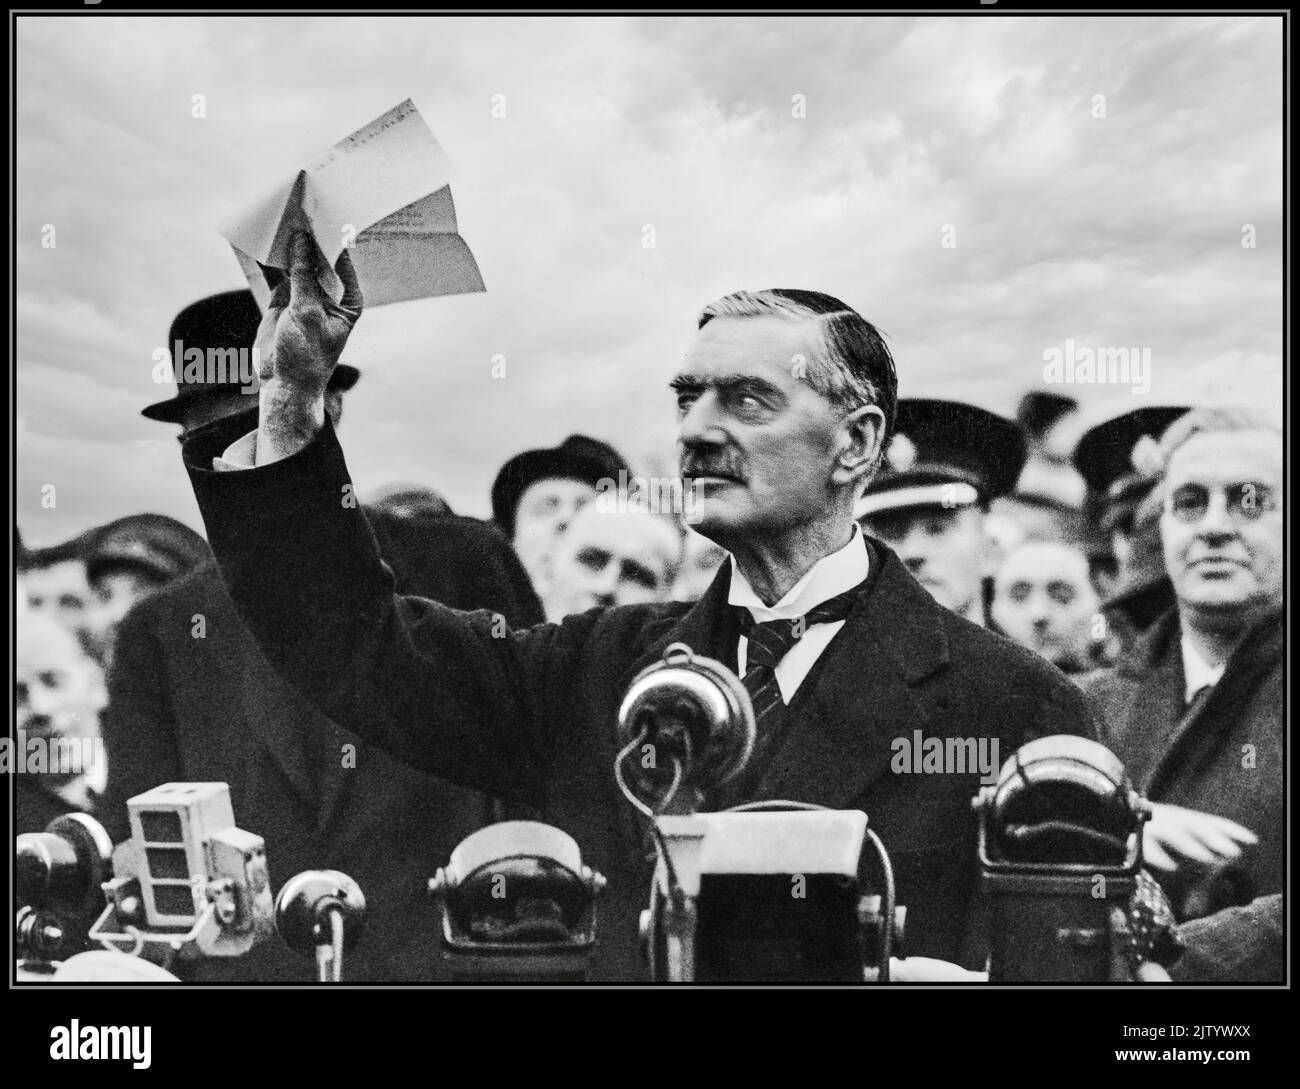 Neville Chamberlain 'Peace for our time' 1938 Munich Agreement. Chamberlain holds 'The' piece of paper proudly aloft signed by both Hitler and himself on his return from Munich to Heston Aerodrome in 1938 with the quote; 'a desire never to go to war again...!'   ( JR6T8M alt image) Stock Photo